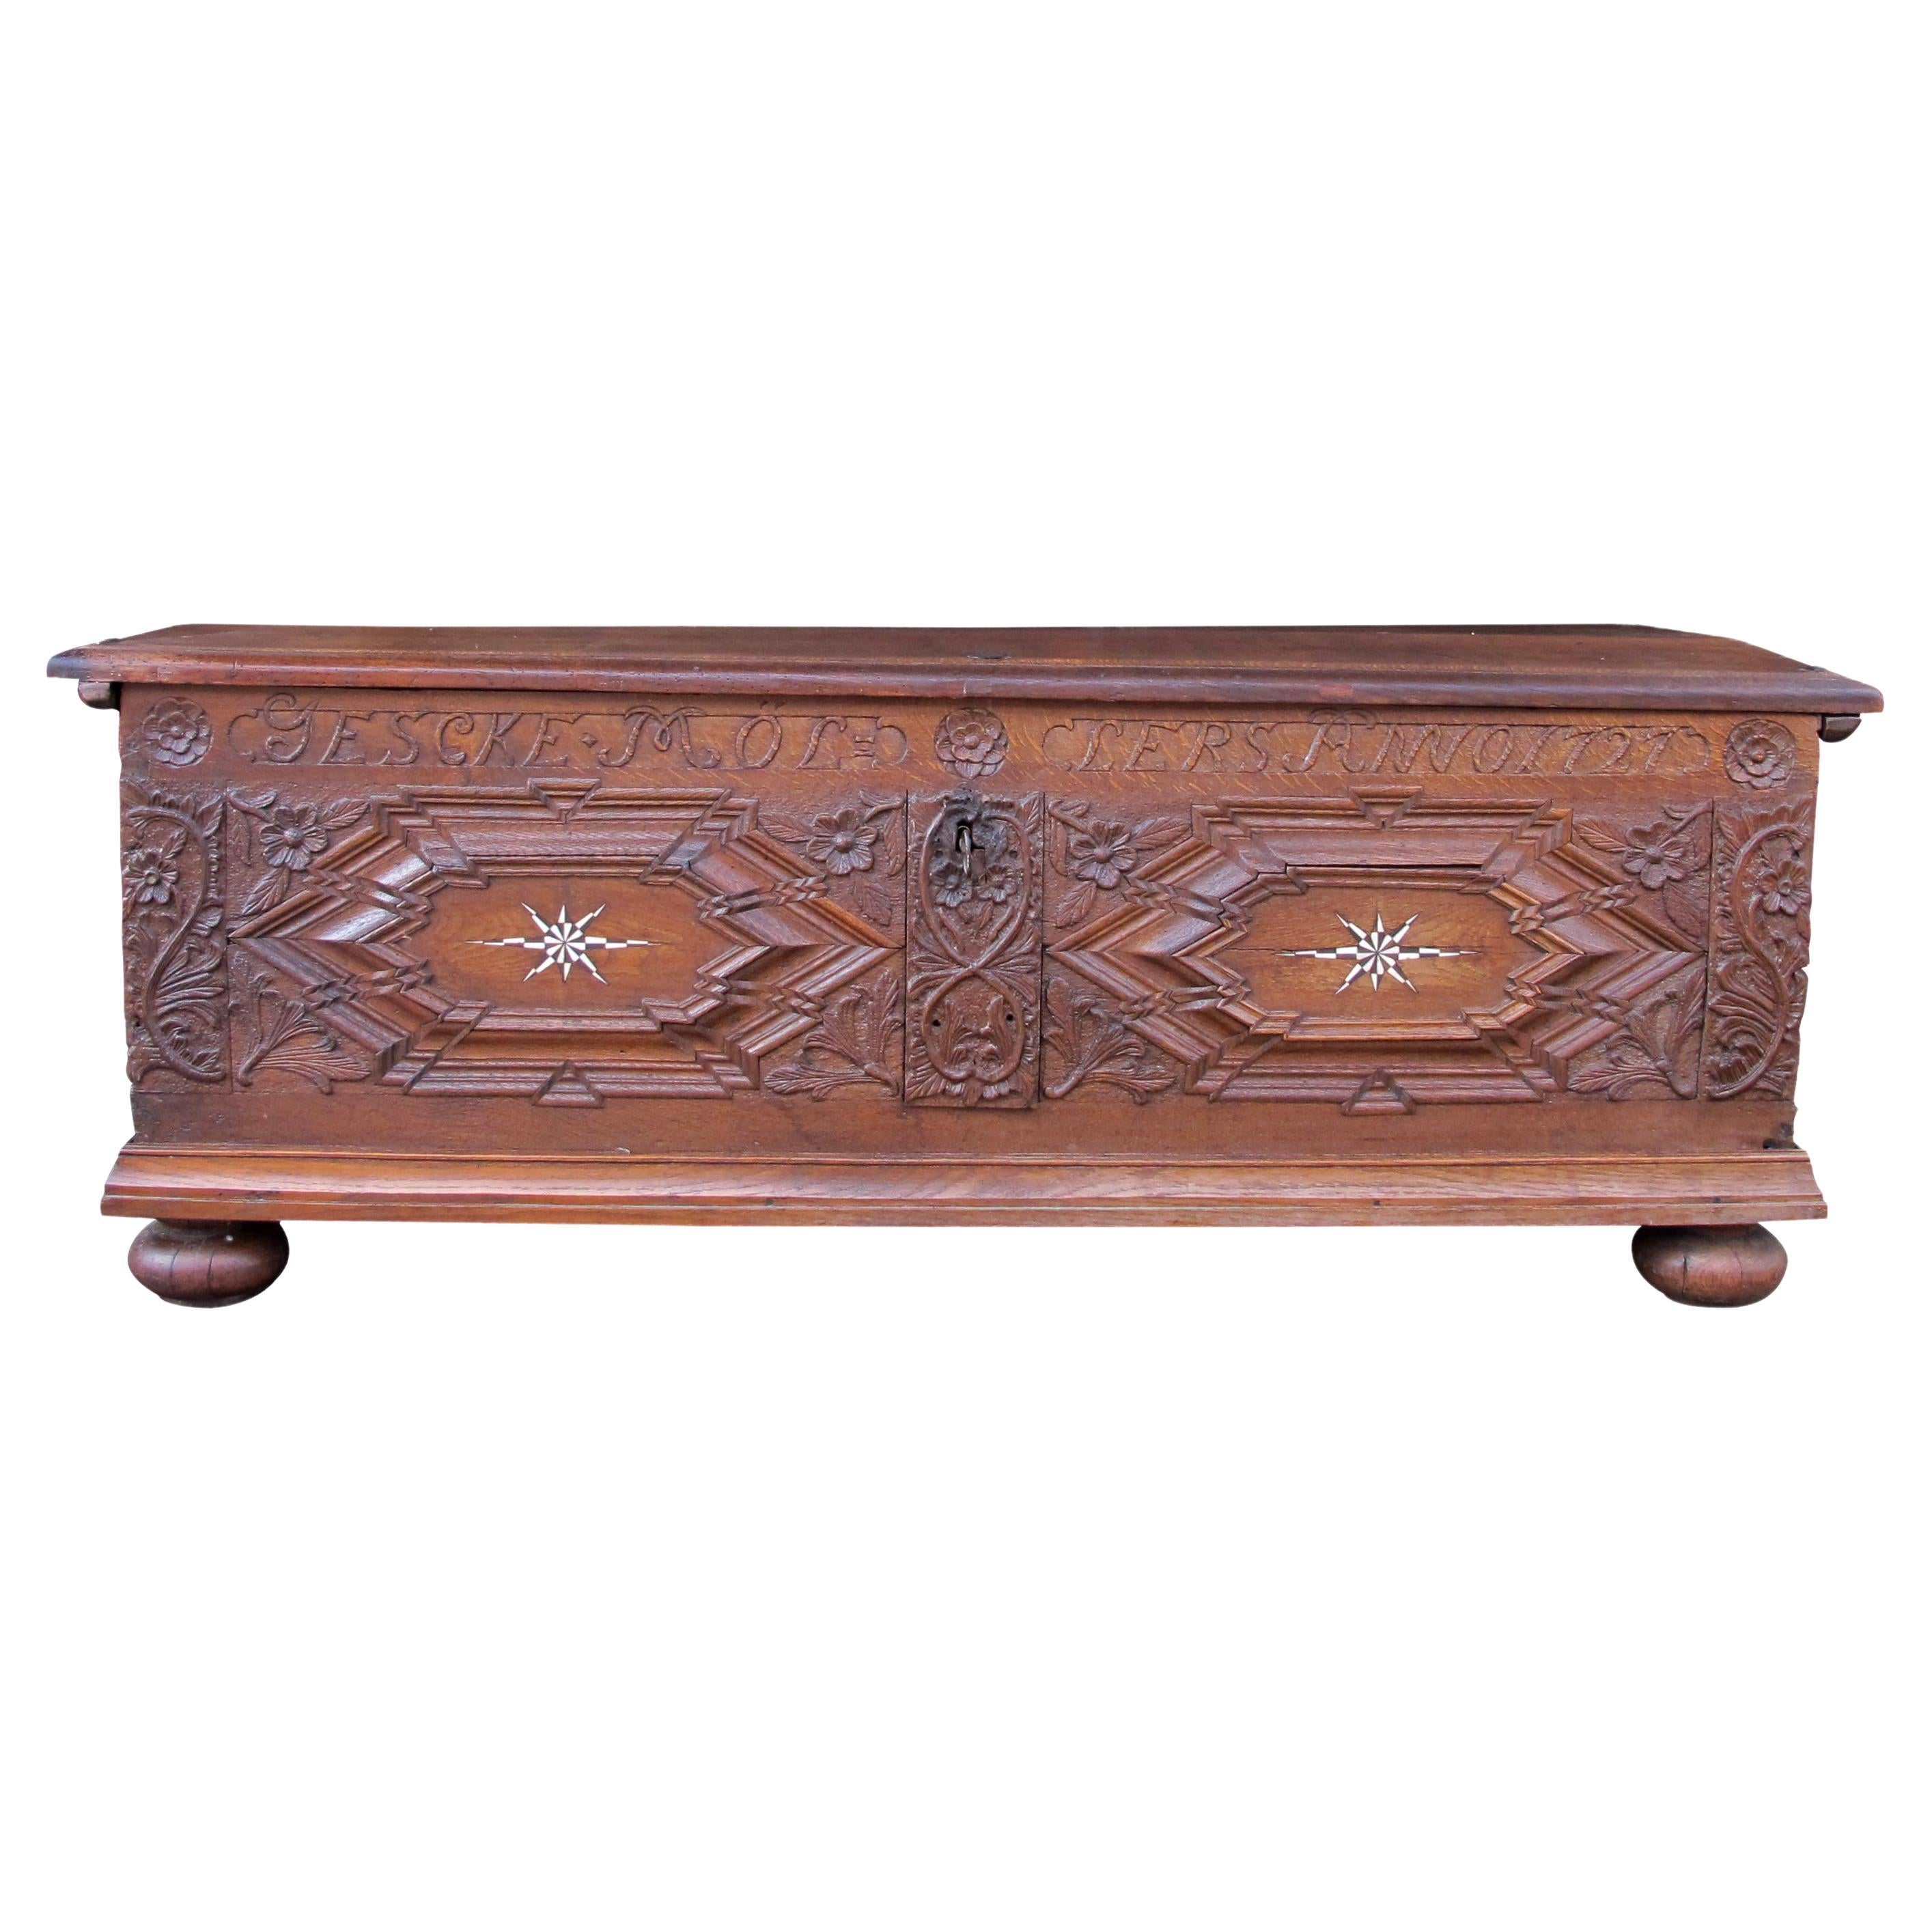 Early 18th Century Large Marriage Oak Trunk With a Vaulted Lid and Carvings For Sale